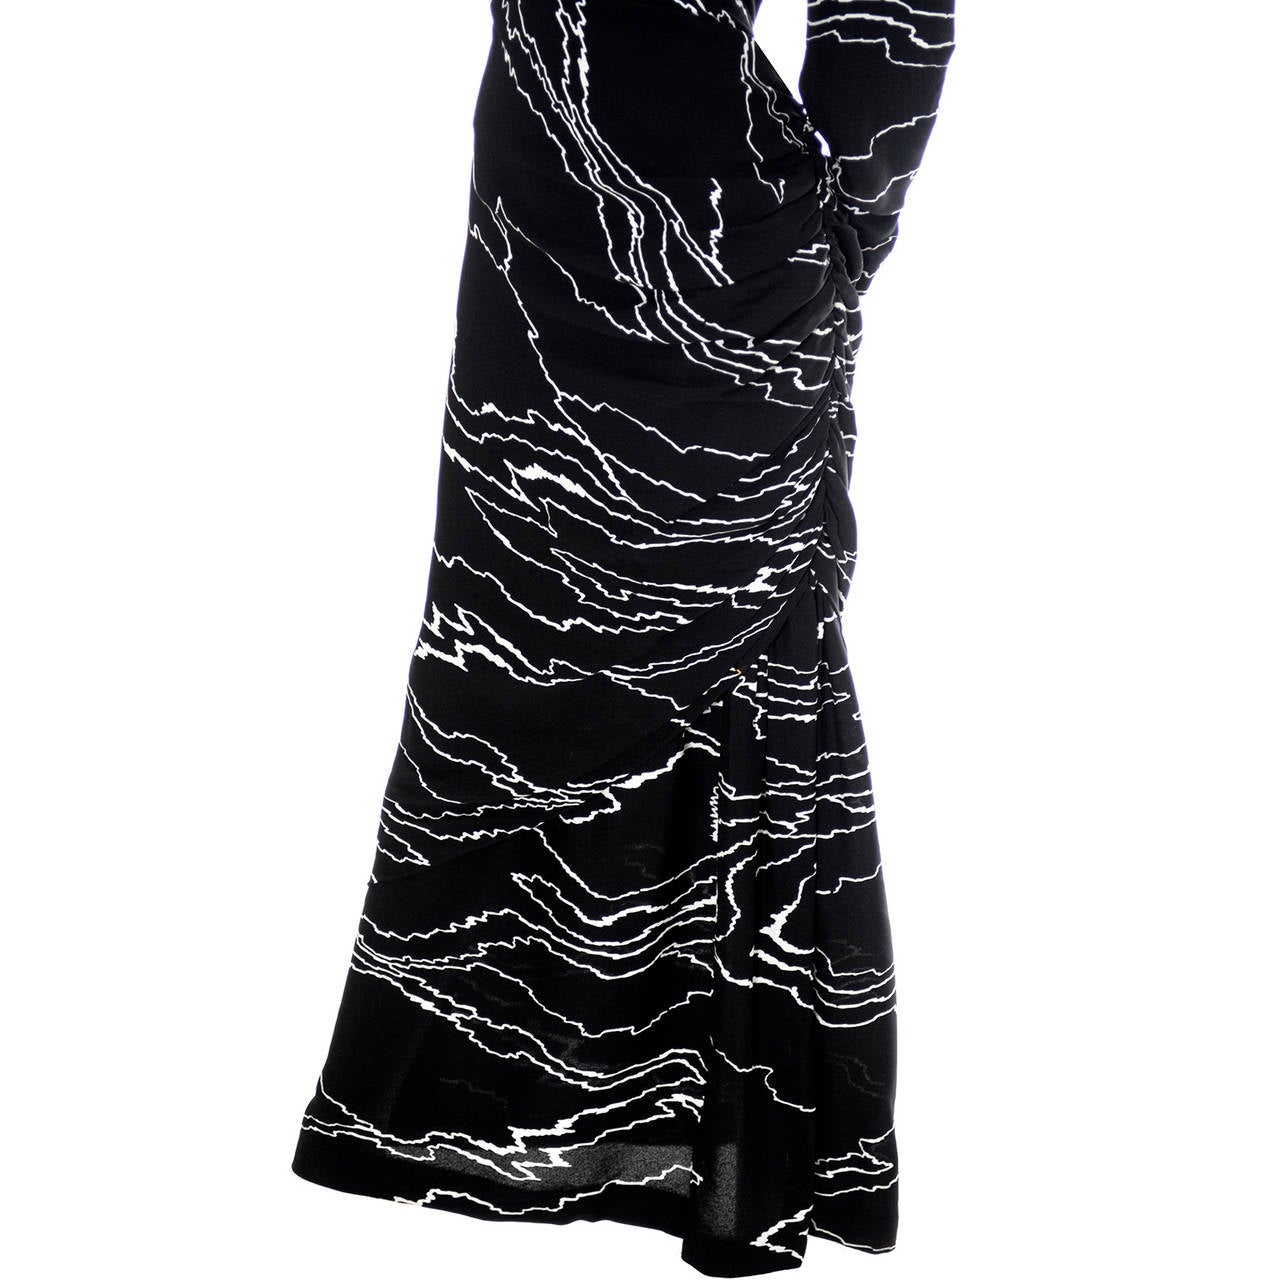 1985 Bill Blass Vintage Runway Dress Abstract Black White Evening Gown Draping For Sale 9